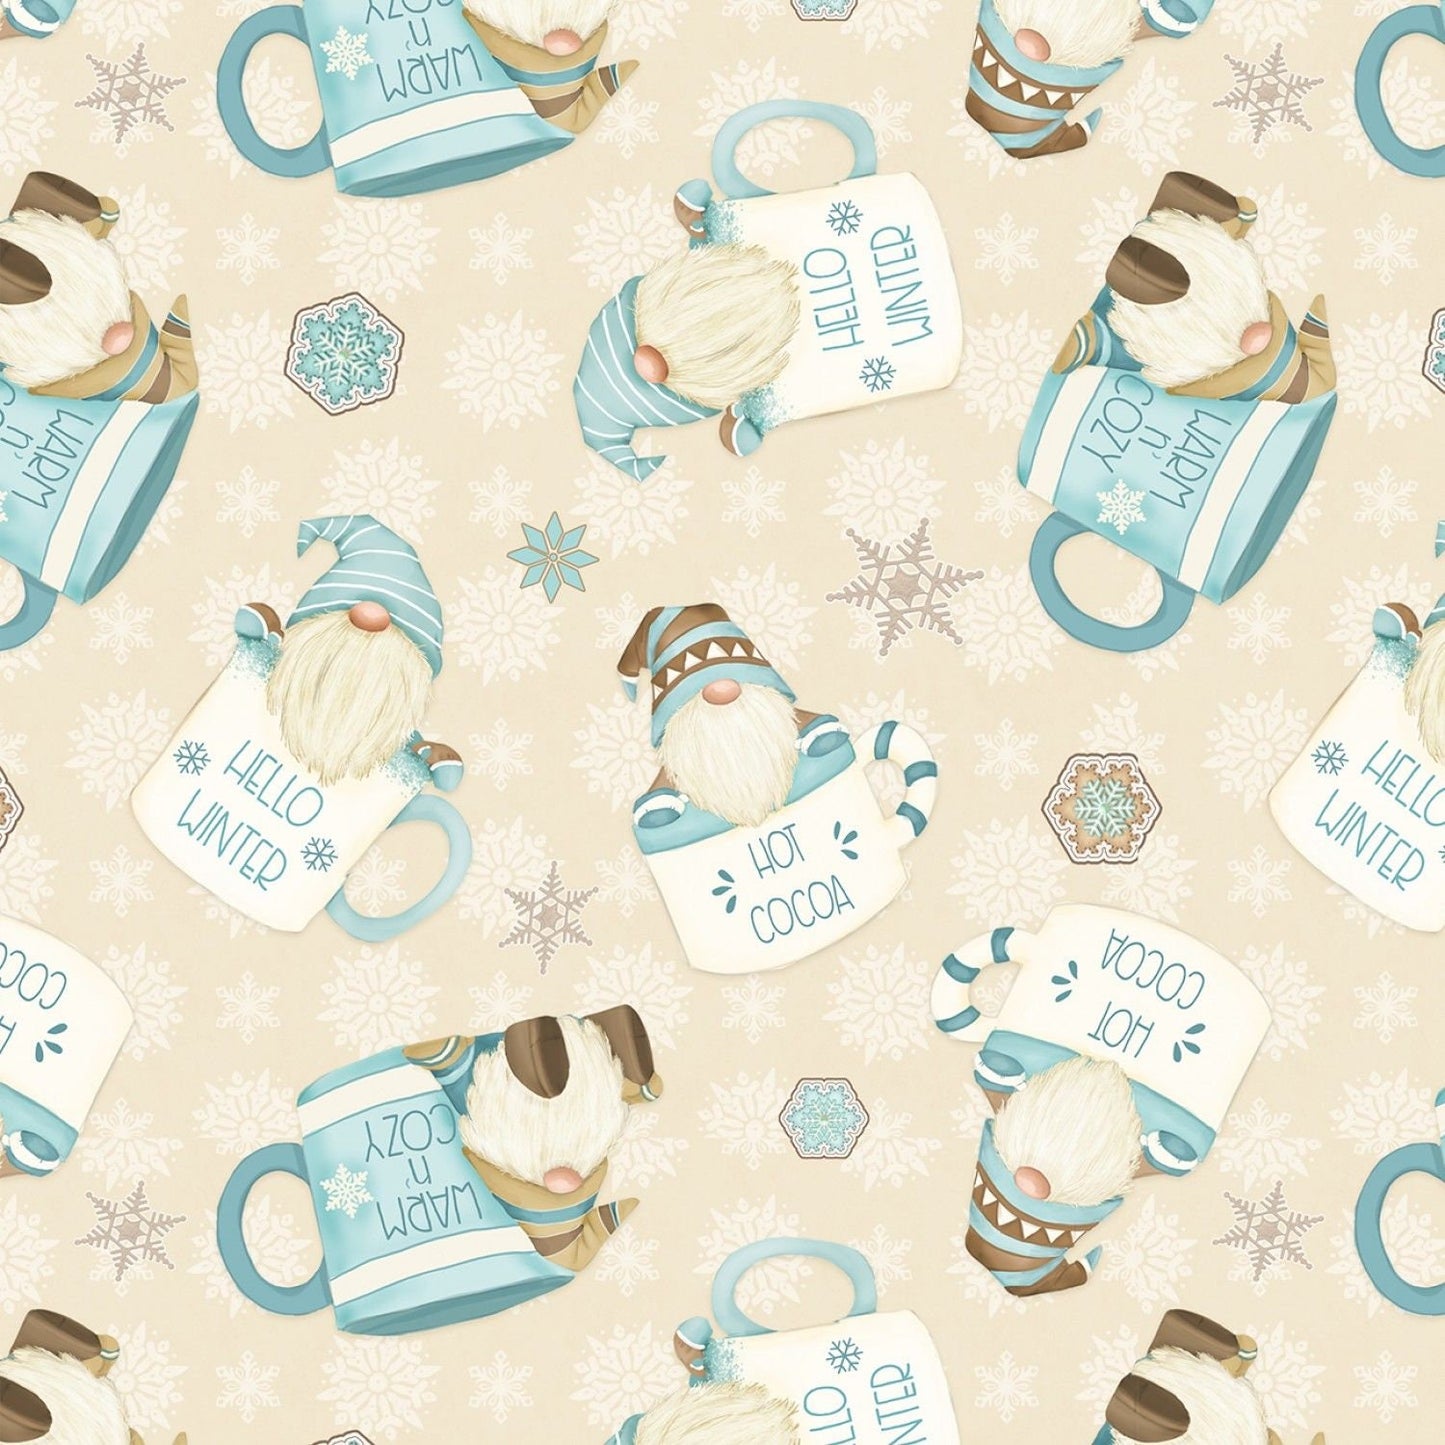 I Love SN'Gnomes by Shelly Comisky Hot Cocoa Cup Gnomes Cream F9640-44 100% Cotton Flannel Fabric